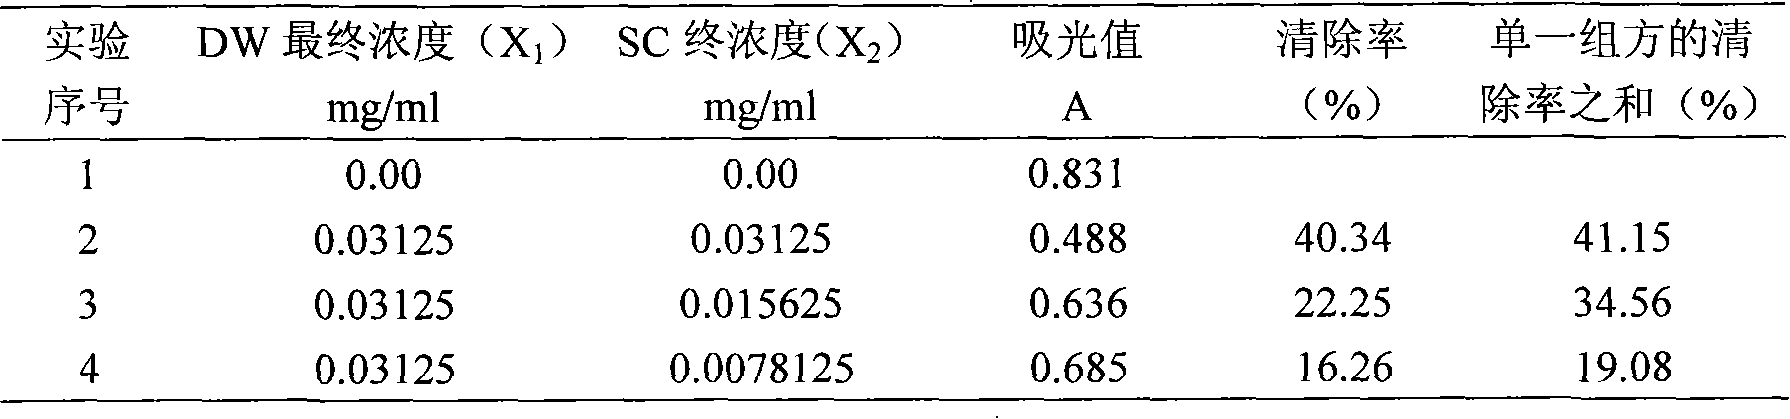 Application of effective parts of Chinese dates and hawthorns in aspect of preparing medicine with activities of lowering blood fat and resisting oxidation